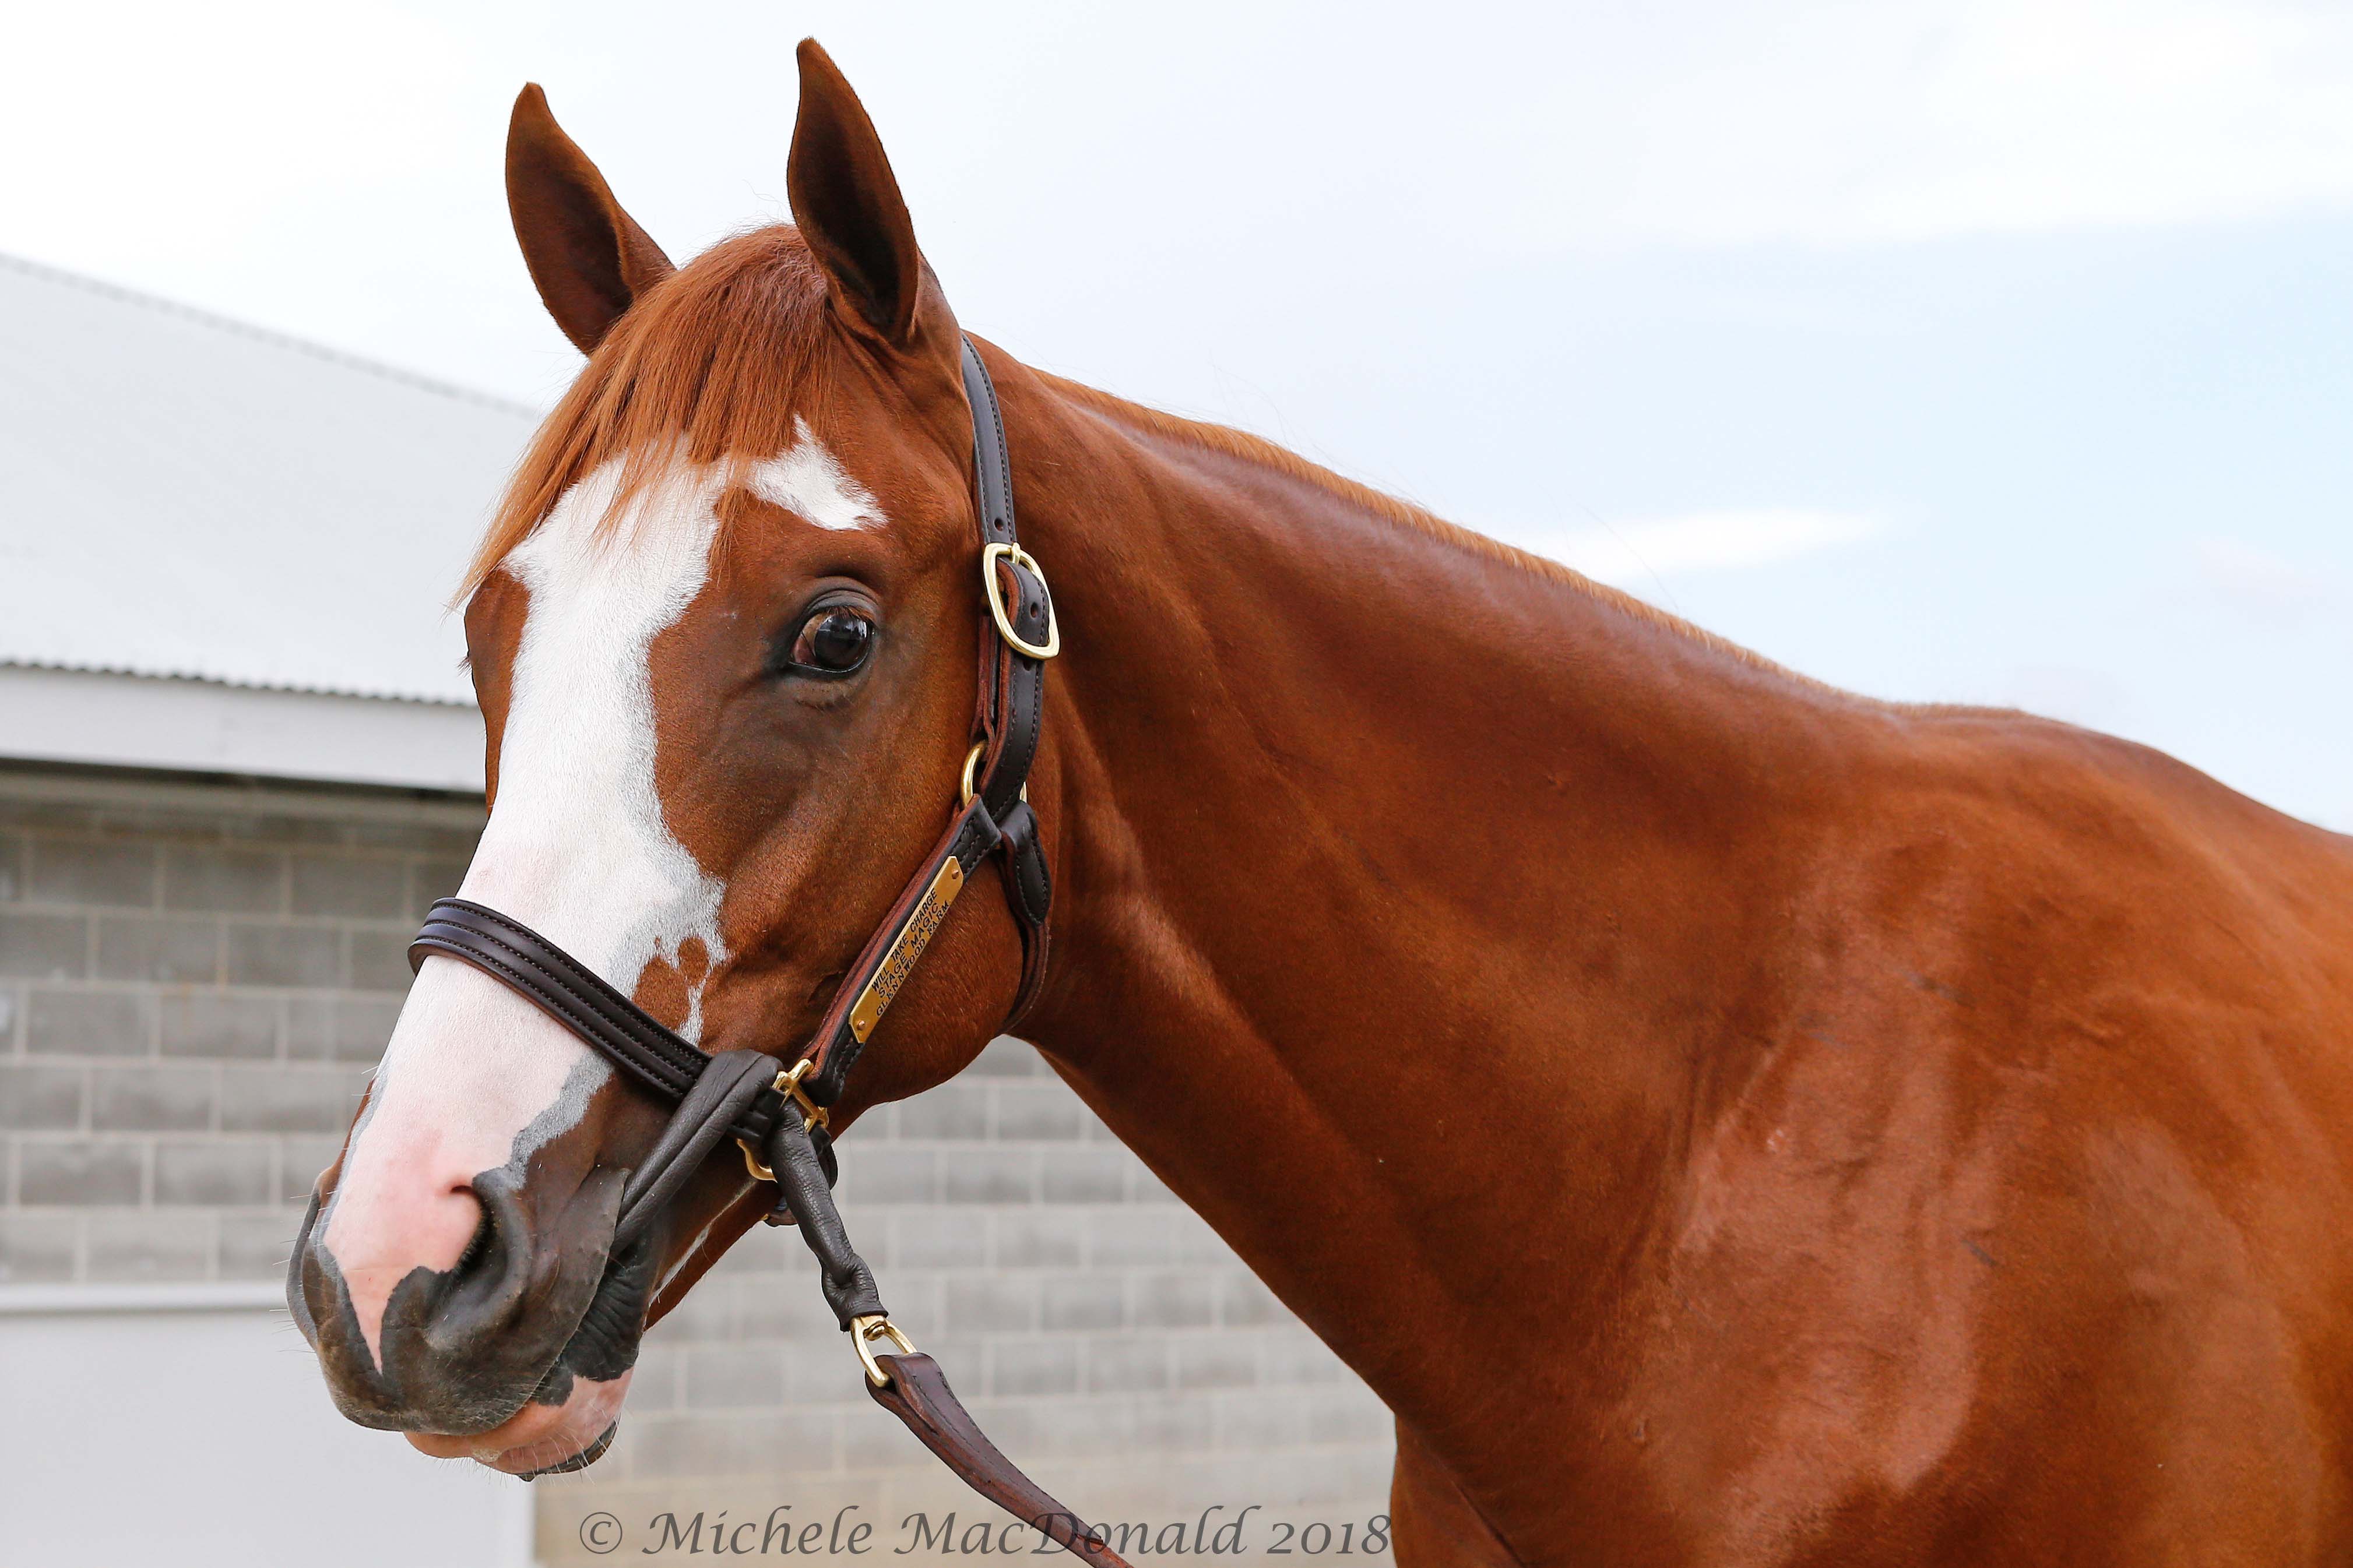 Justify’s juvenile half-brother One More City, a son of Will Take Charge, is currently being prepared for racing at a pre-training center. Photo: Michele MacDonald